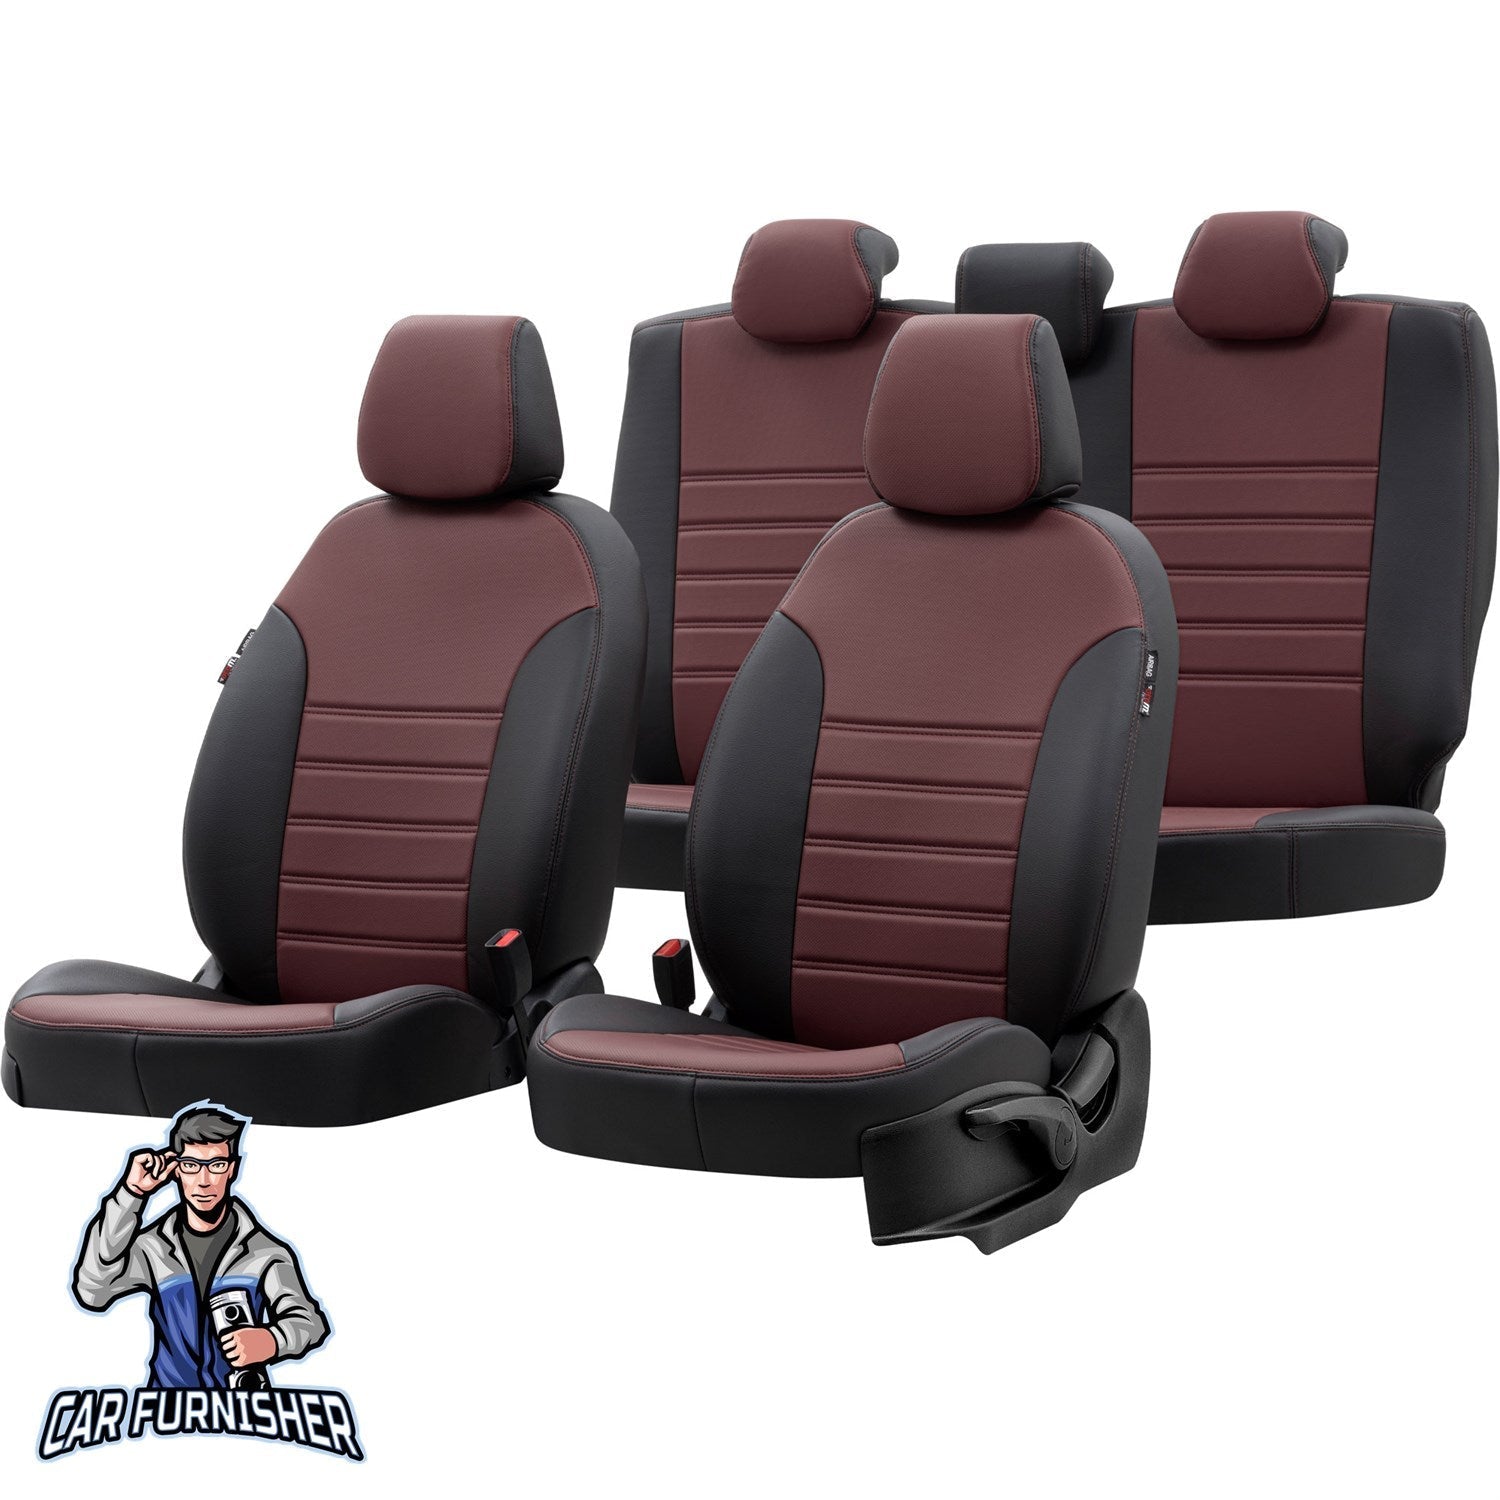 Ssangyong Kyron Seat Covers Istanbul Leather Design Burgundy Leather